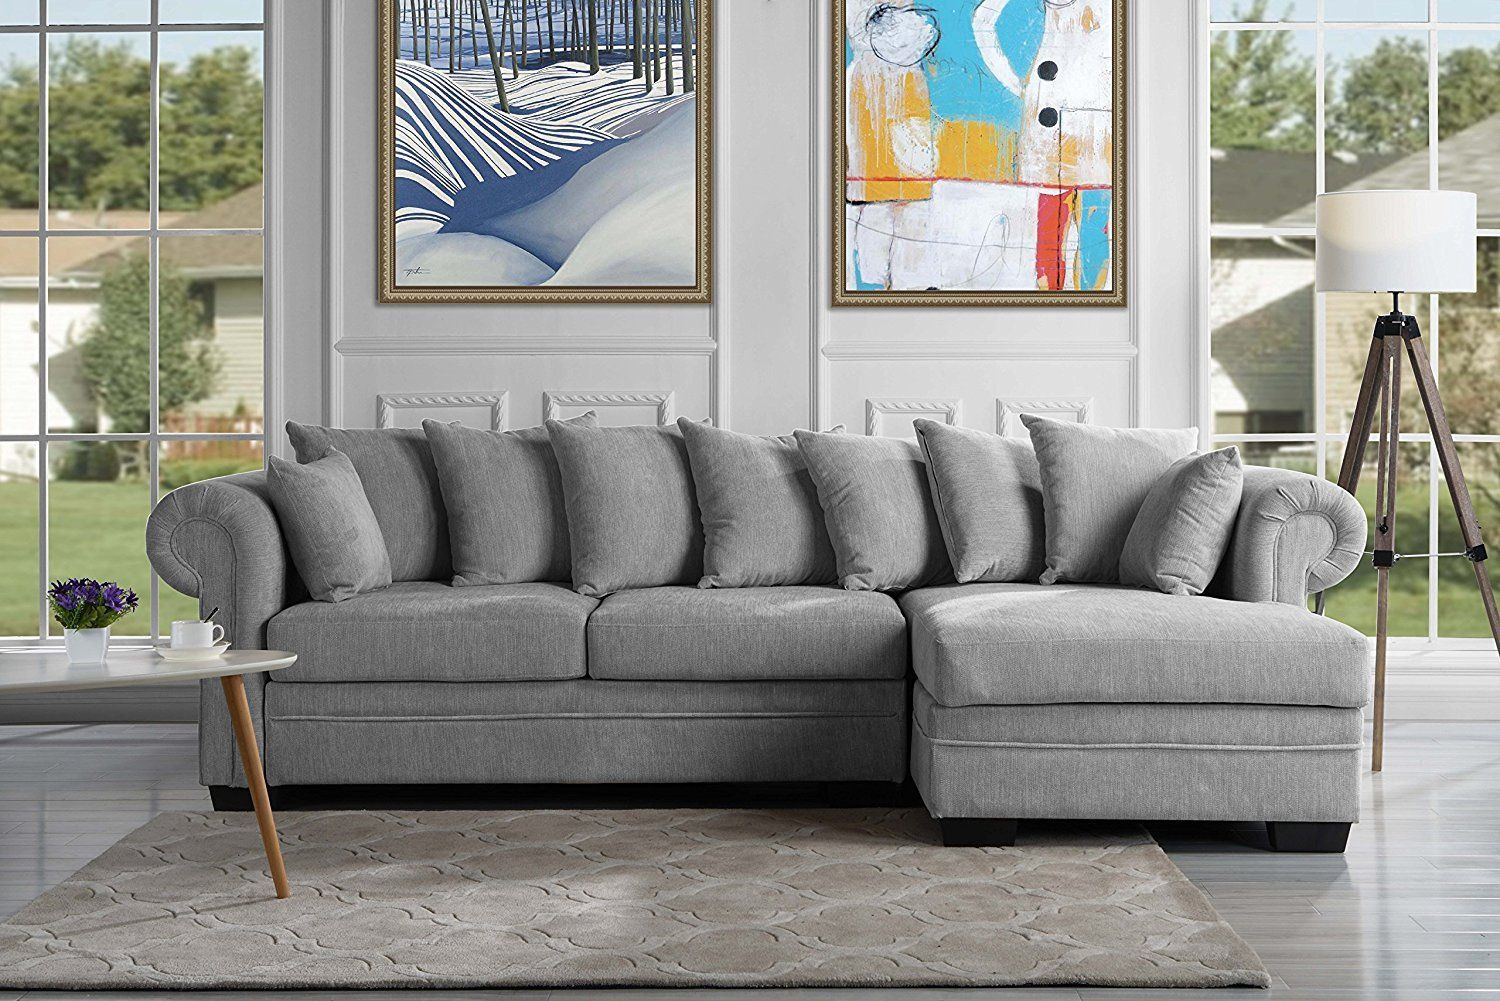 Modern Large Sectional Sofa, L Shape Couch W/ Extra Wide Chaise, Light Regarding Modern Light Grey Loveseat Sofas (Gallery 5 of 20)